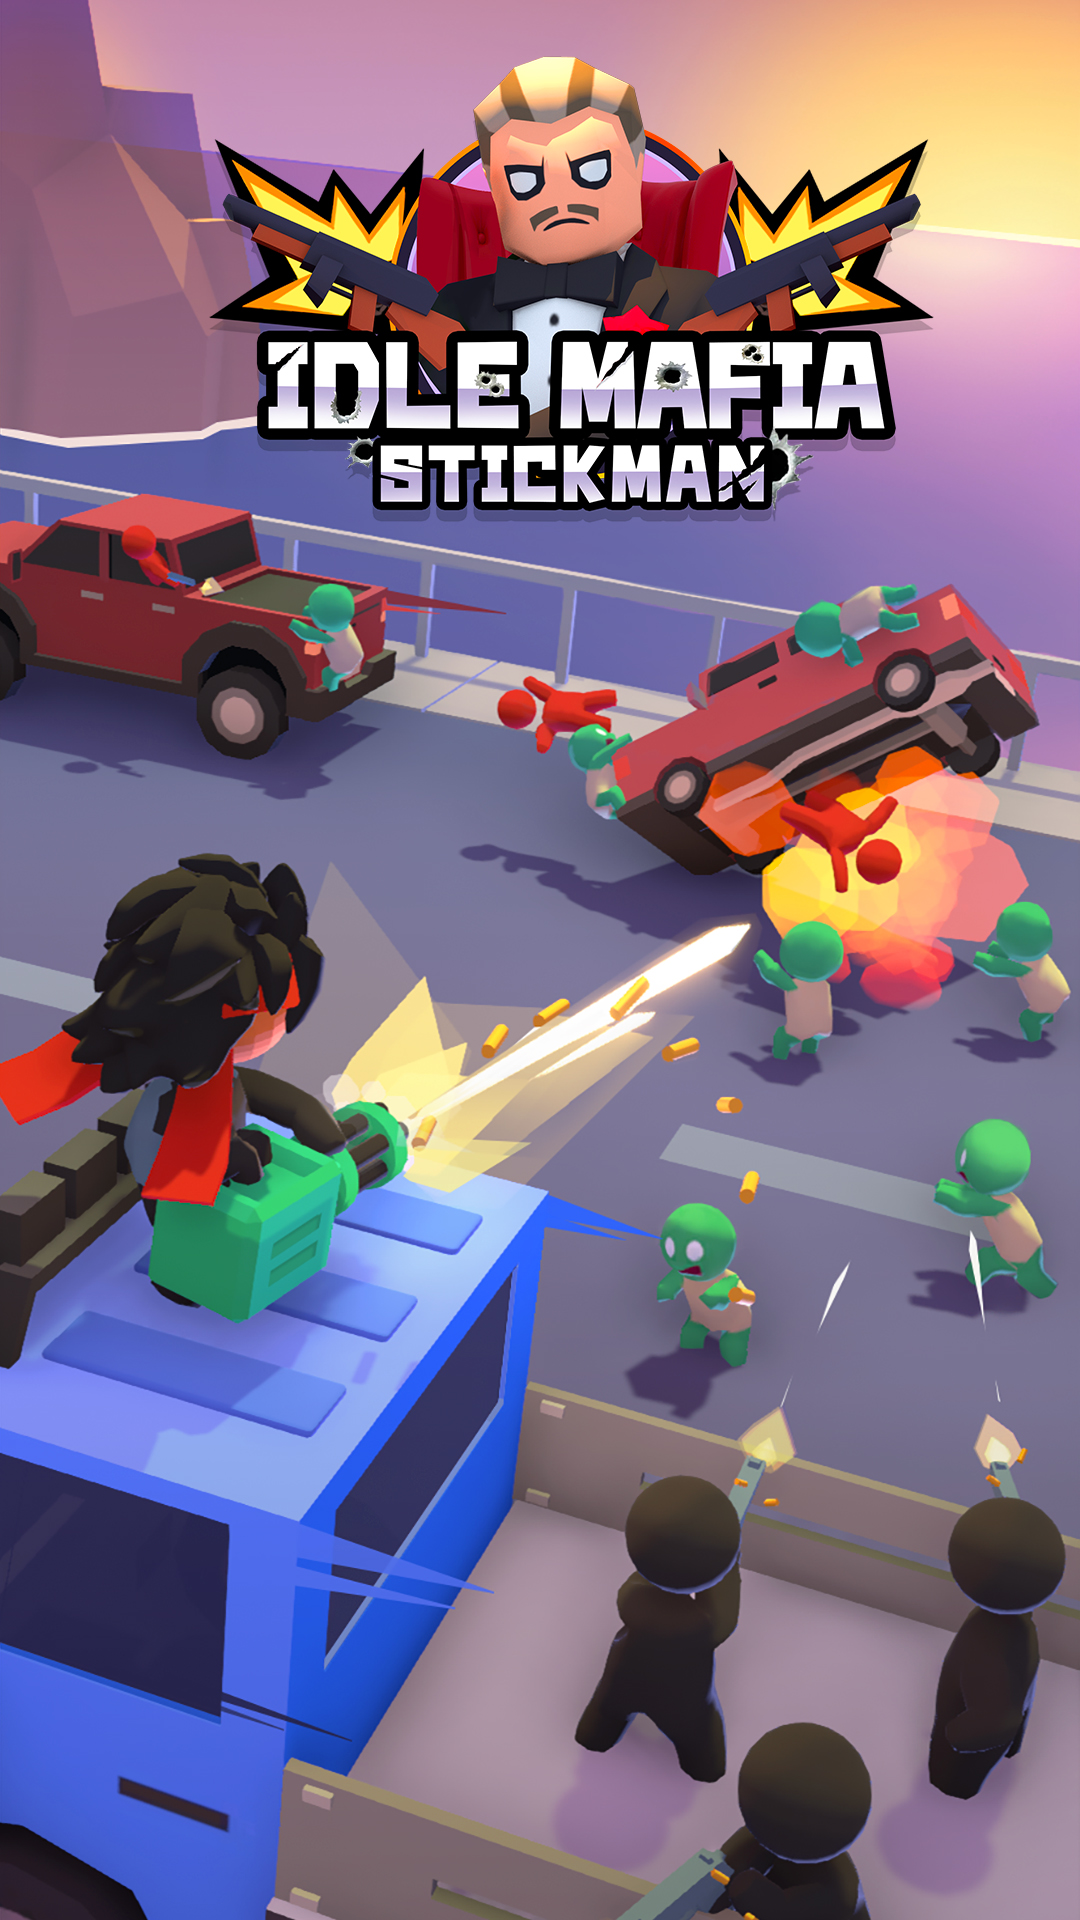 Full version of Android Shooter game apk Stickman: Idle Mafia for tablet and phone.